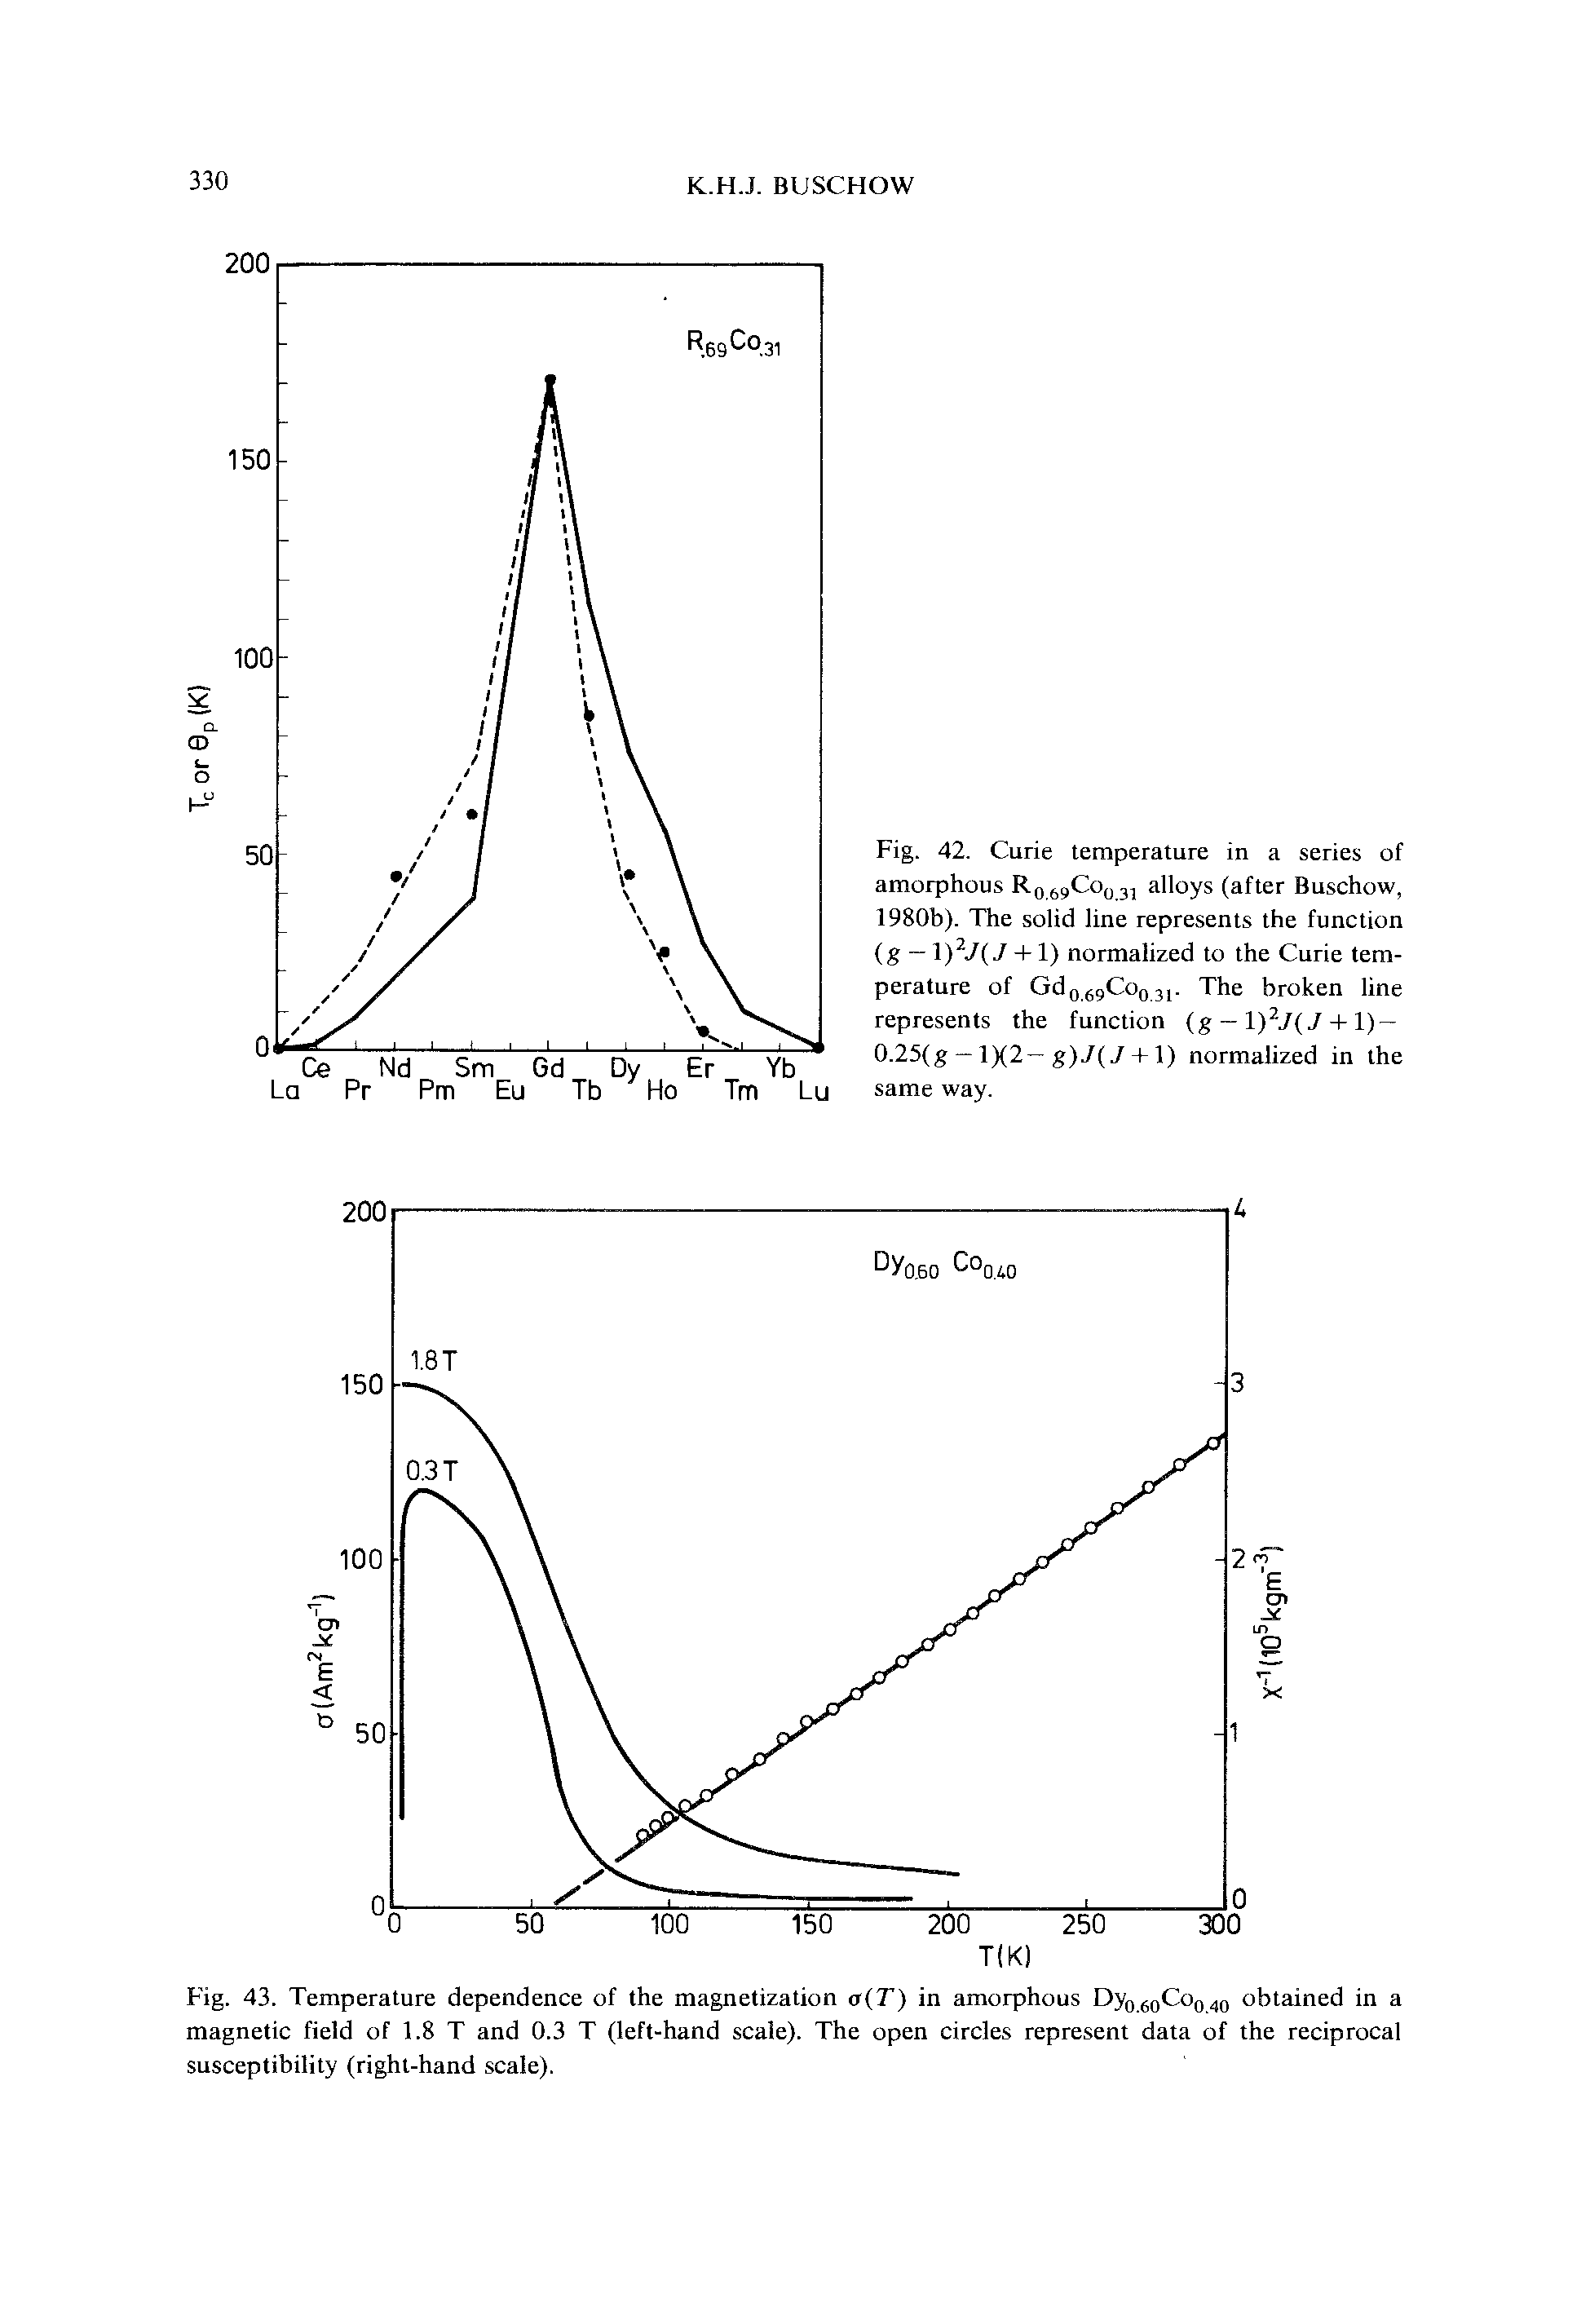 Fig. 43. Temperature dependence of the magnetization o T) in amorphous Dyo.6oGoo4o obtained in a magnetic field of 1.8 T and 0.3 T (left-hand scale). The open circles represent data of the reciprocal susceptibility (right-hand scale).